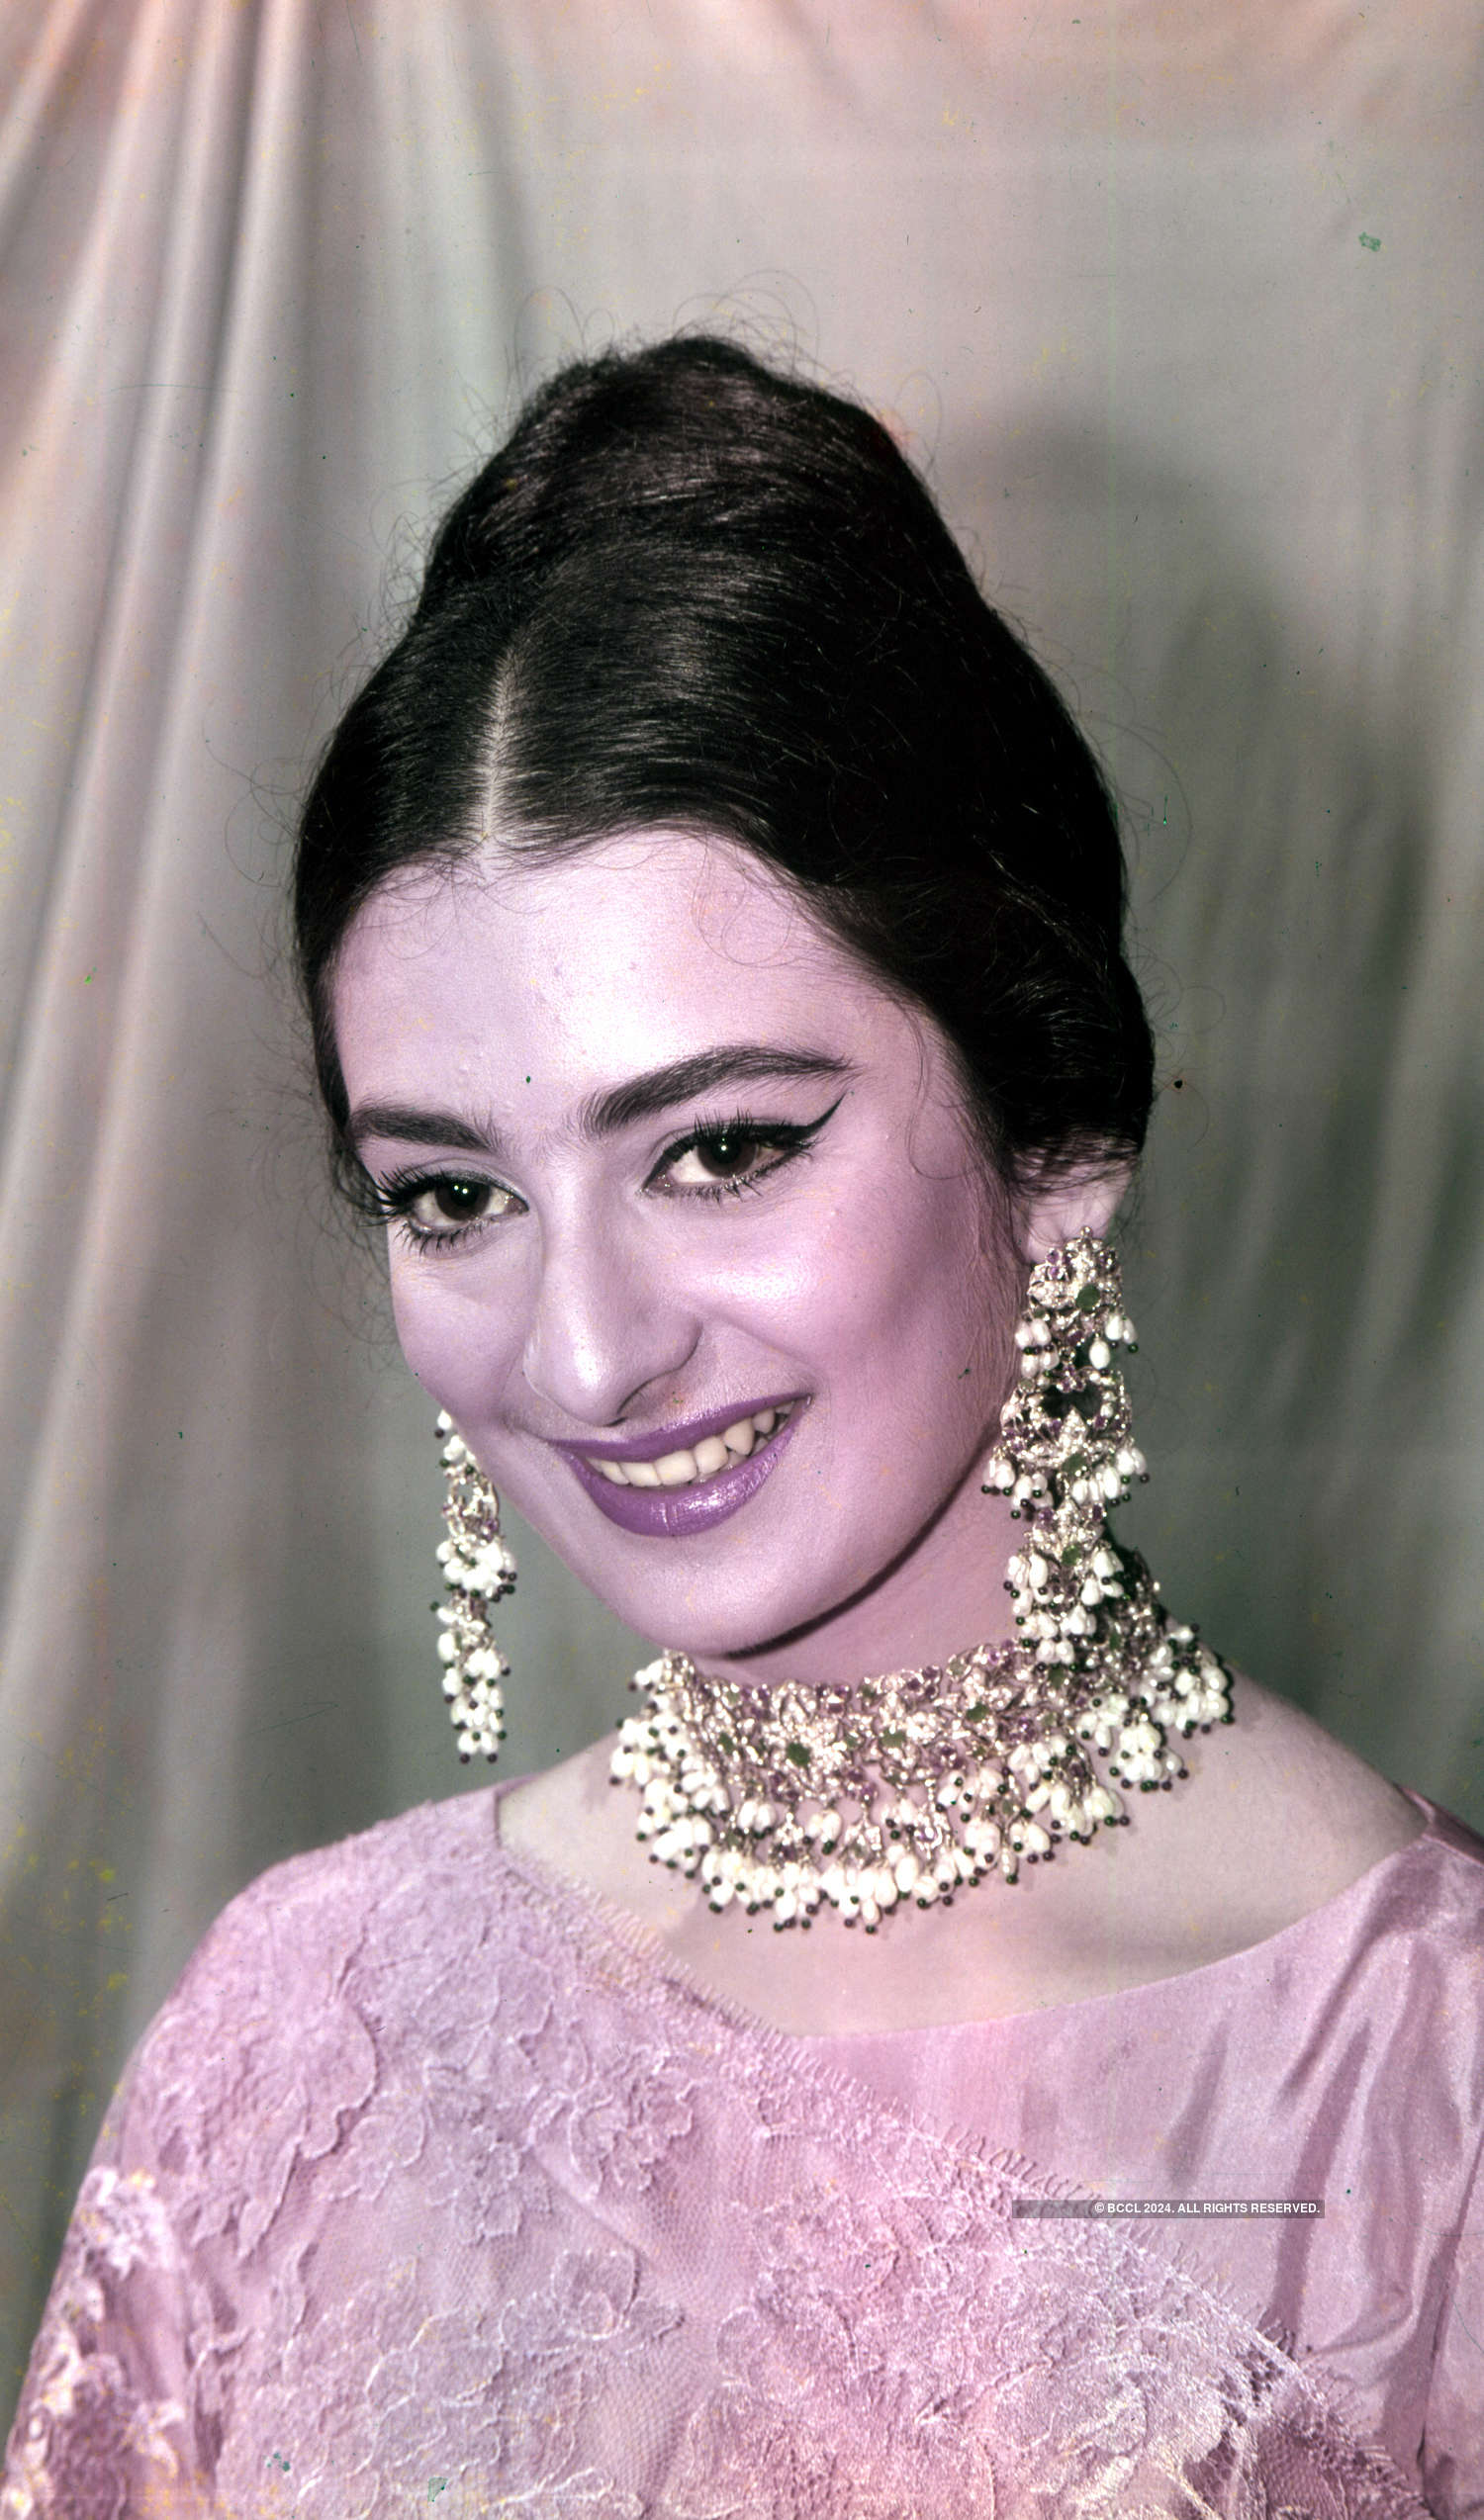 Saira Banu, known for her charisma and style